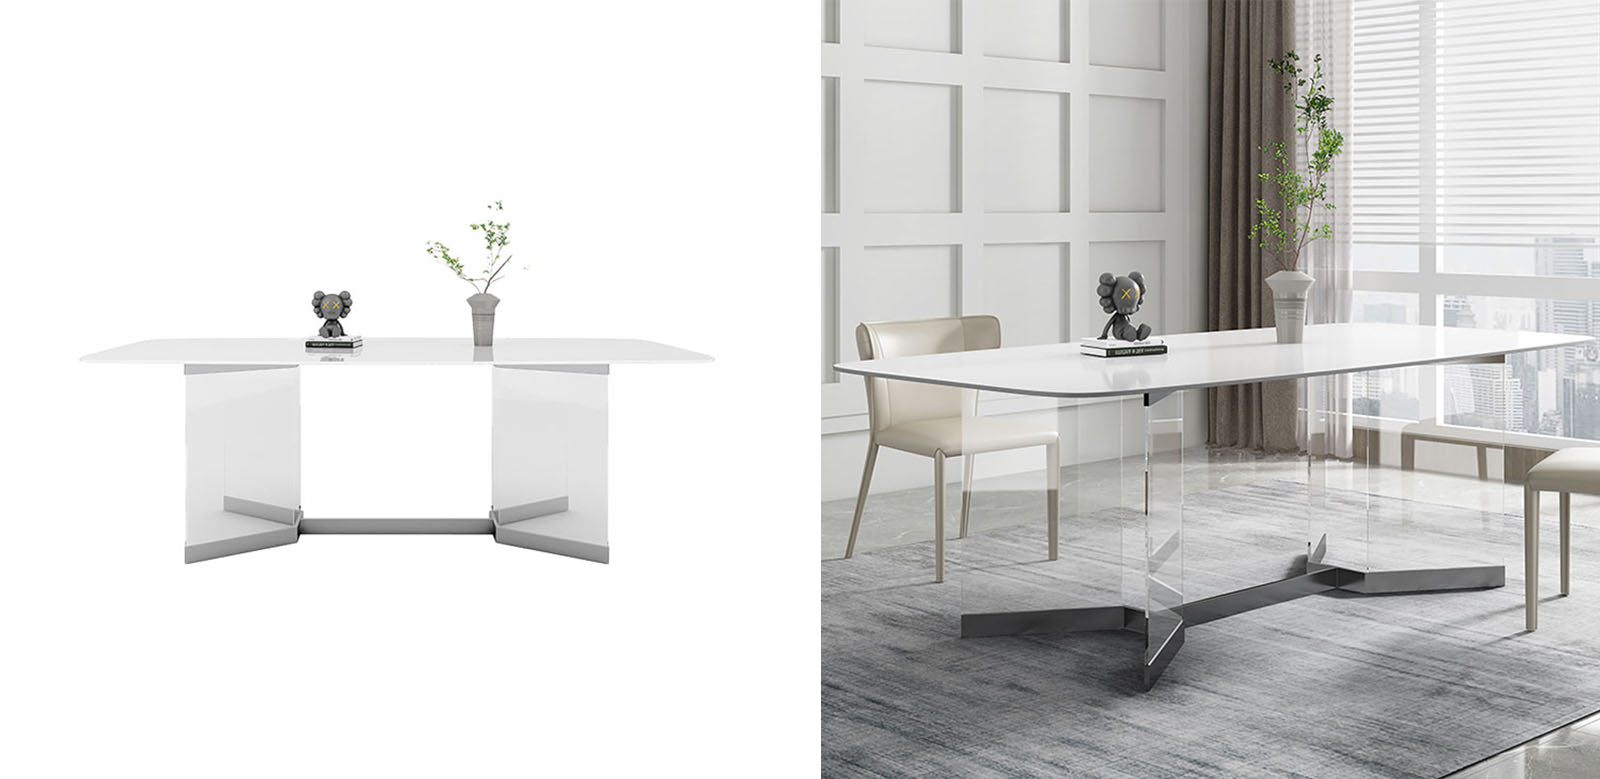 Veromca Dining Table, Sintered Stone｜Rit Concept